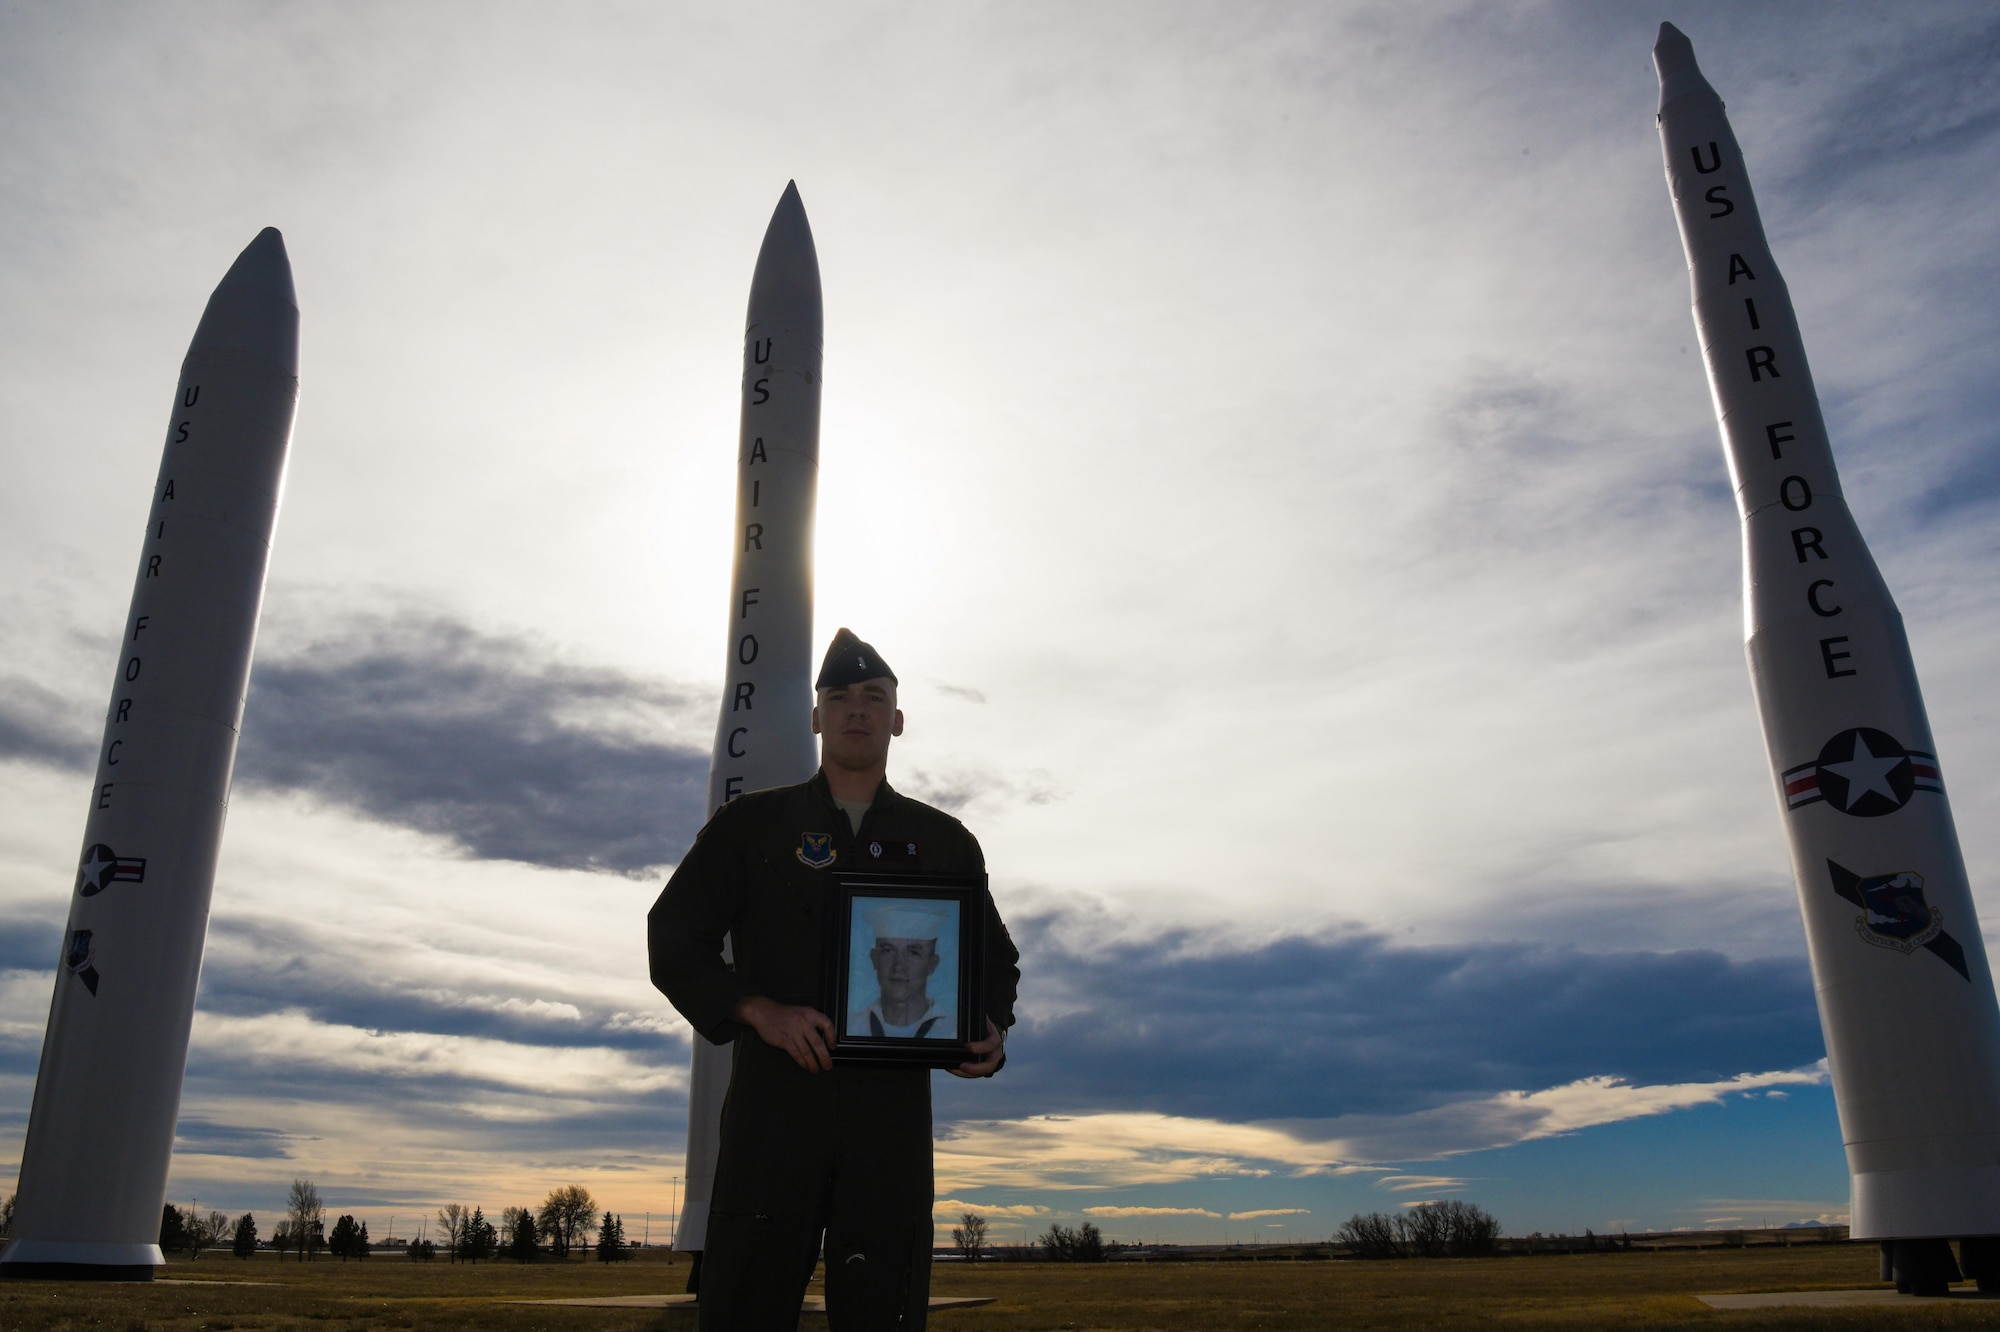 1st Lt. Tyler Lindquist, 320th nuclear and missile crew commander, holds a picture of Medal of Honor recipient Marvin Glenn Shields at F.E. Warren Air Force Base, Wyo., Nov. 29, 2017. Shields created a lasting impact on Lindquist as his great uncle, which resulted in his choice to serve a career within the U.S. Air Force. (U.S. Air Force photo by Airman 1st Class Abbigayle Wagner)